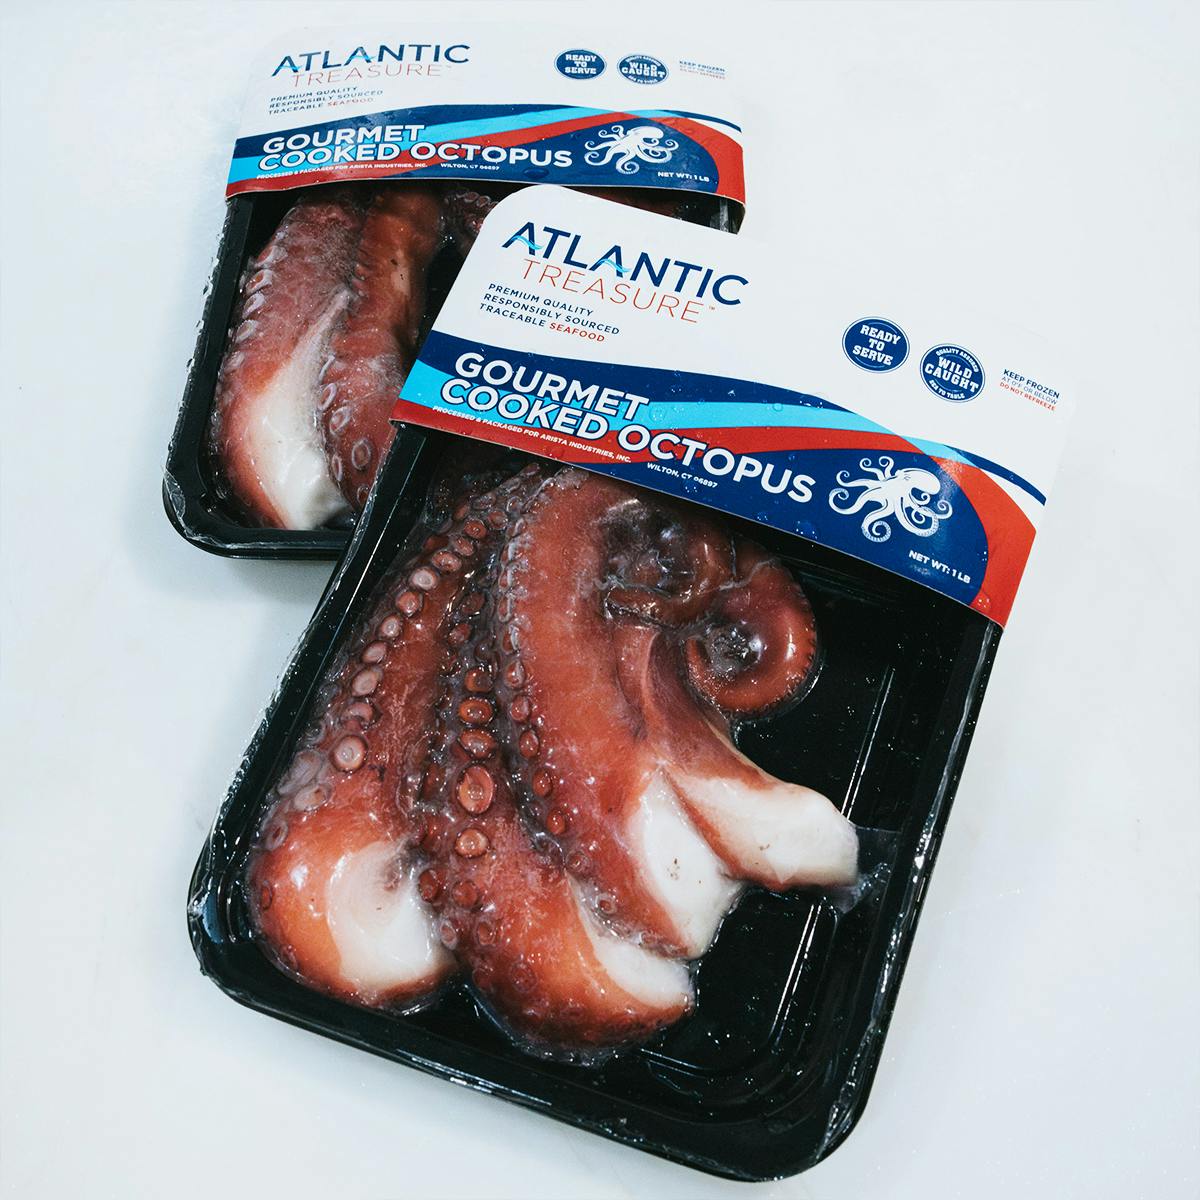 Octopus - Fully Cooked, Mediterranean, Wild, 1lb